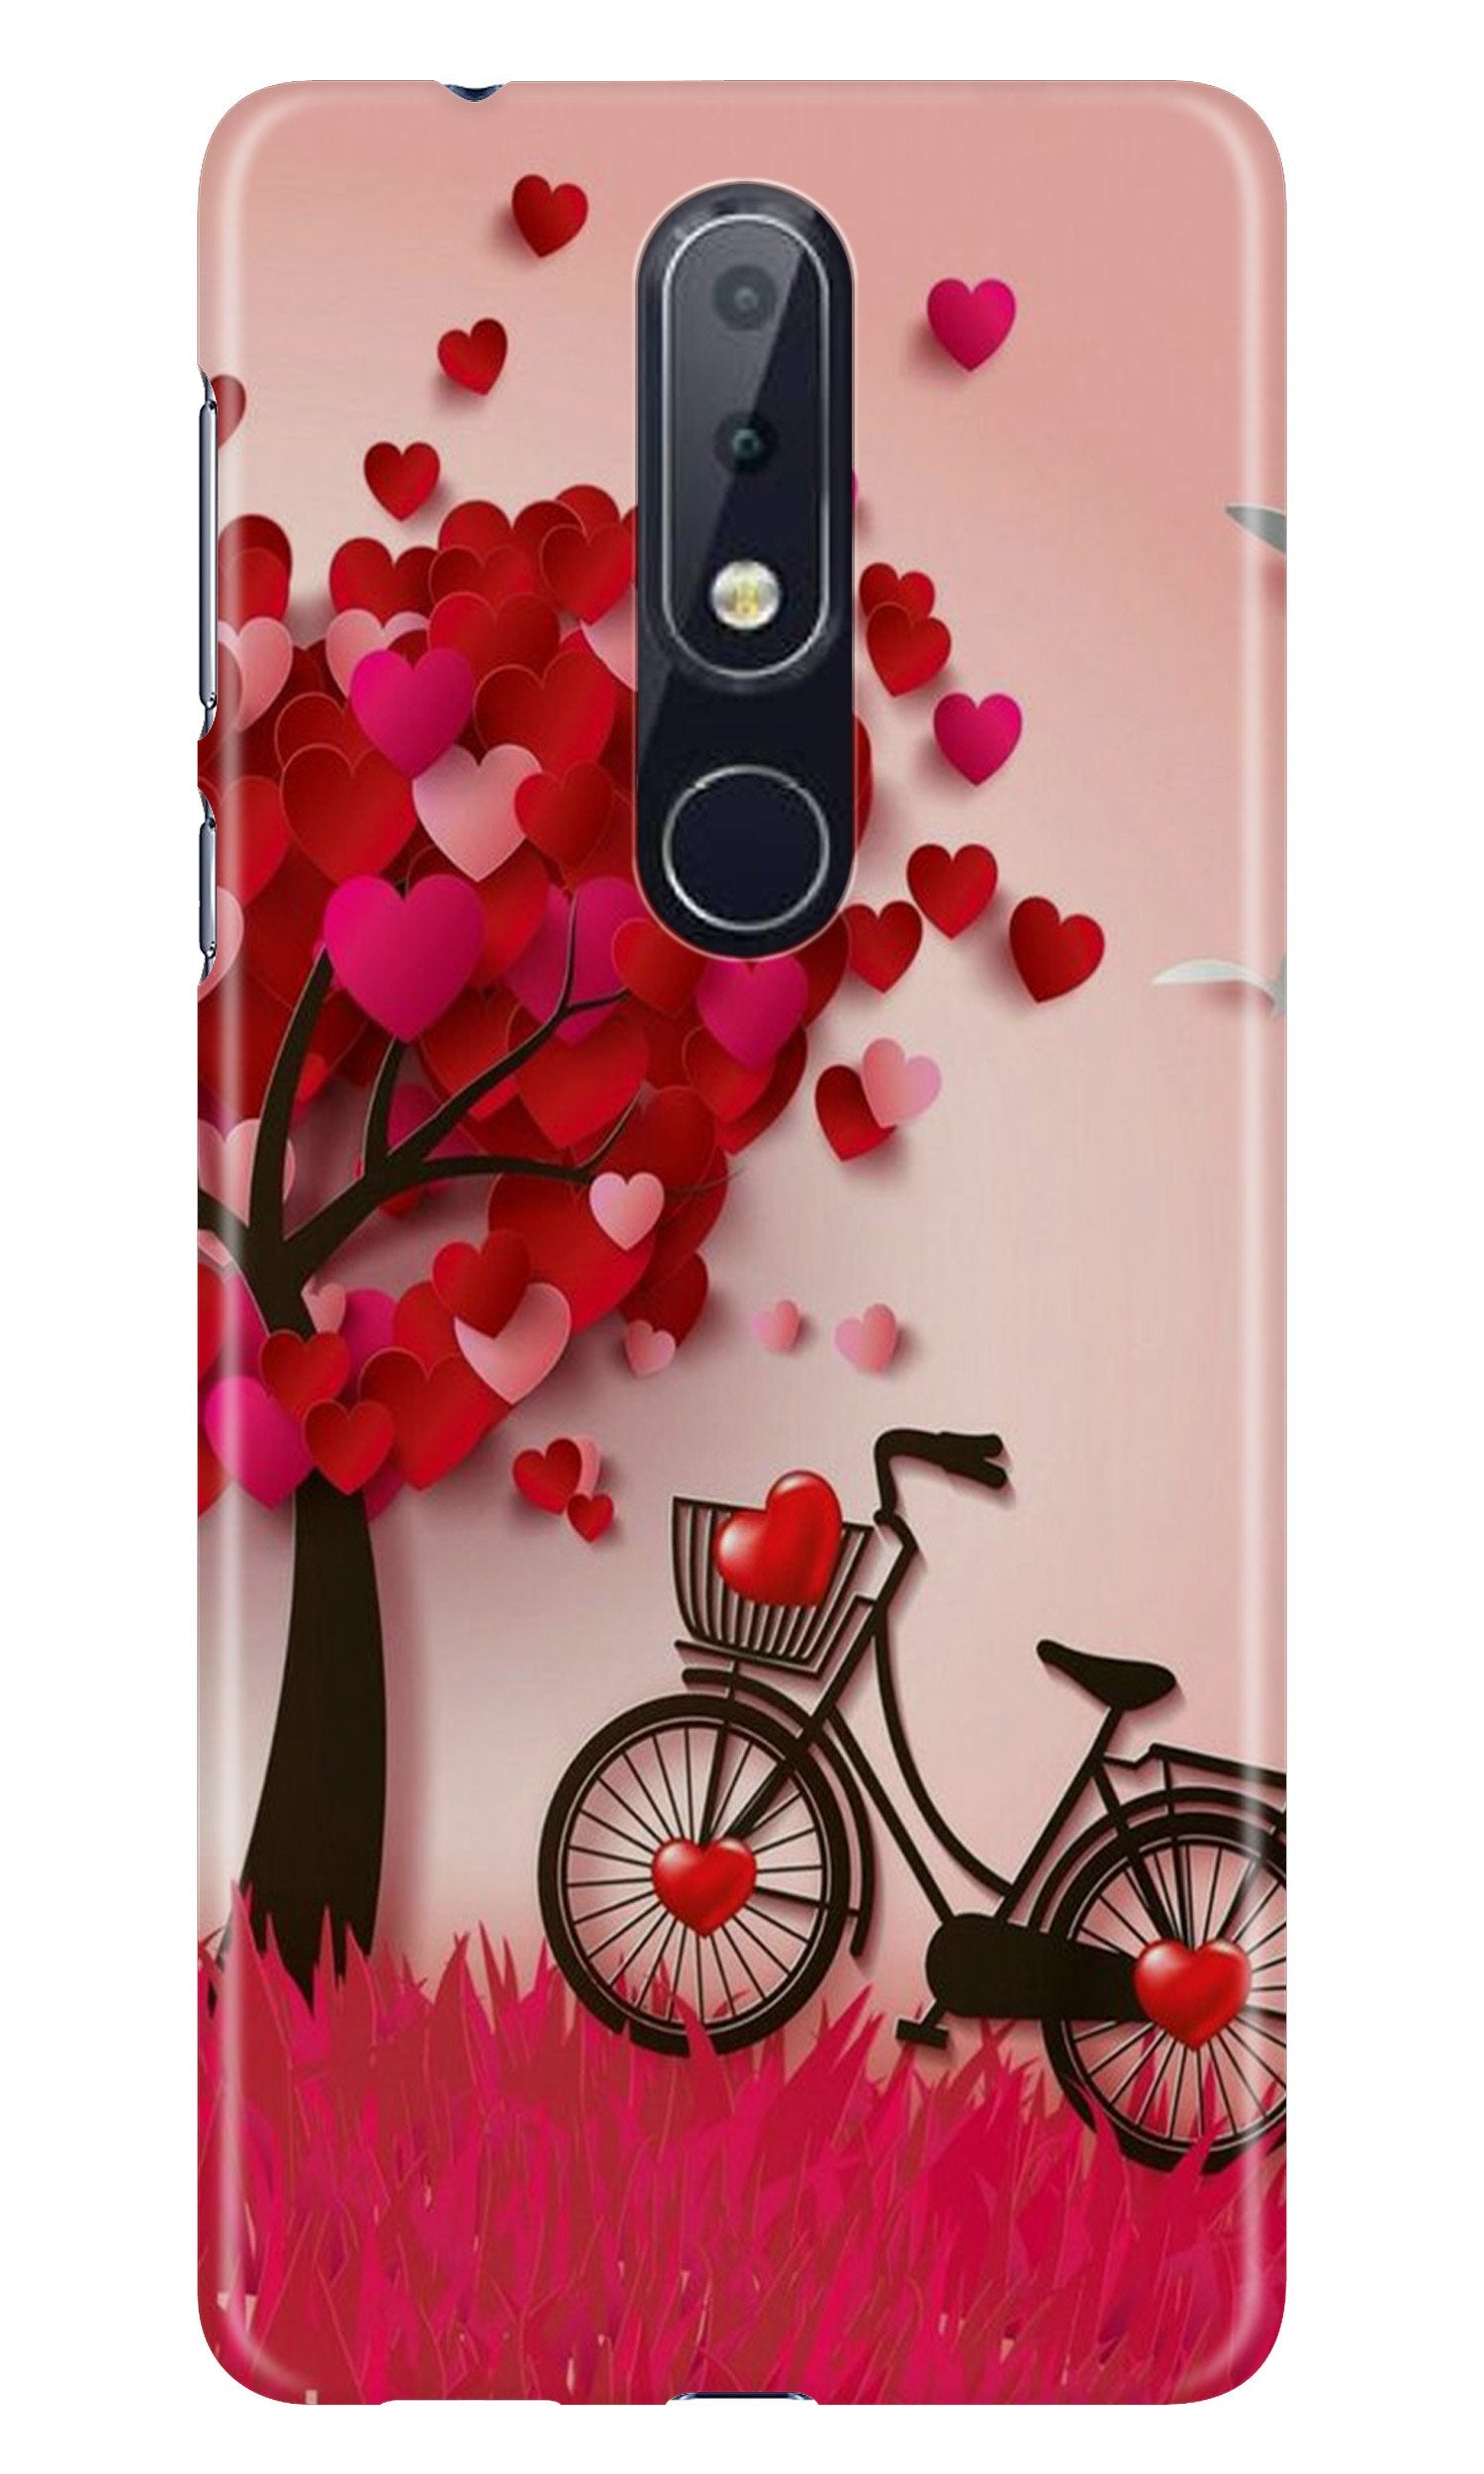 Red Heart Cycle Case for Nokia 4.2 (Design No. 222)